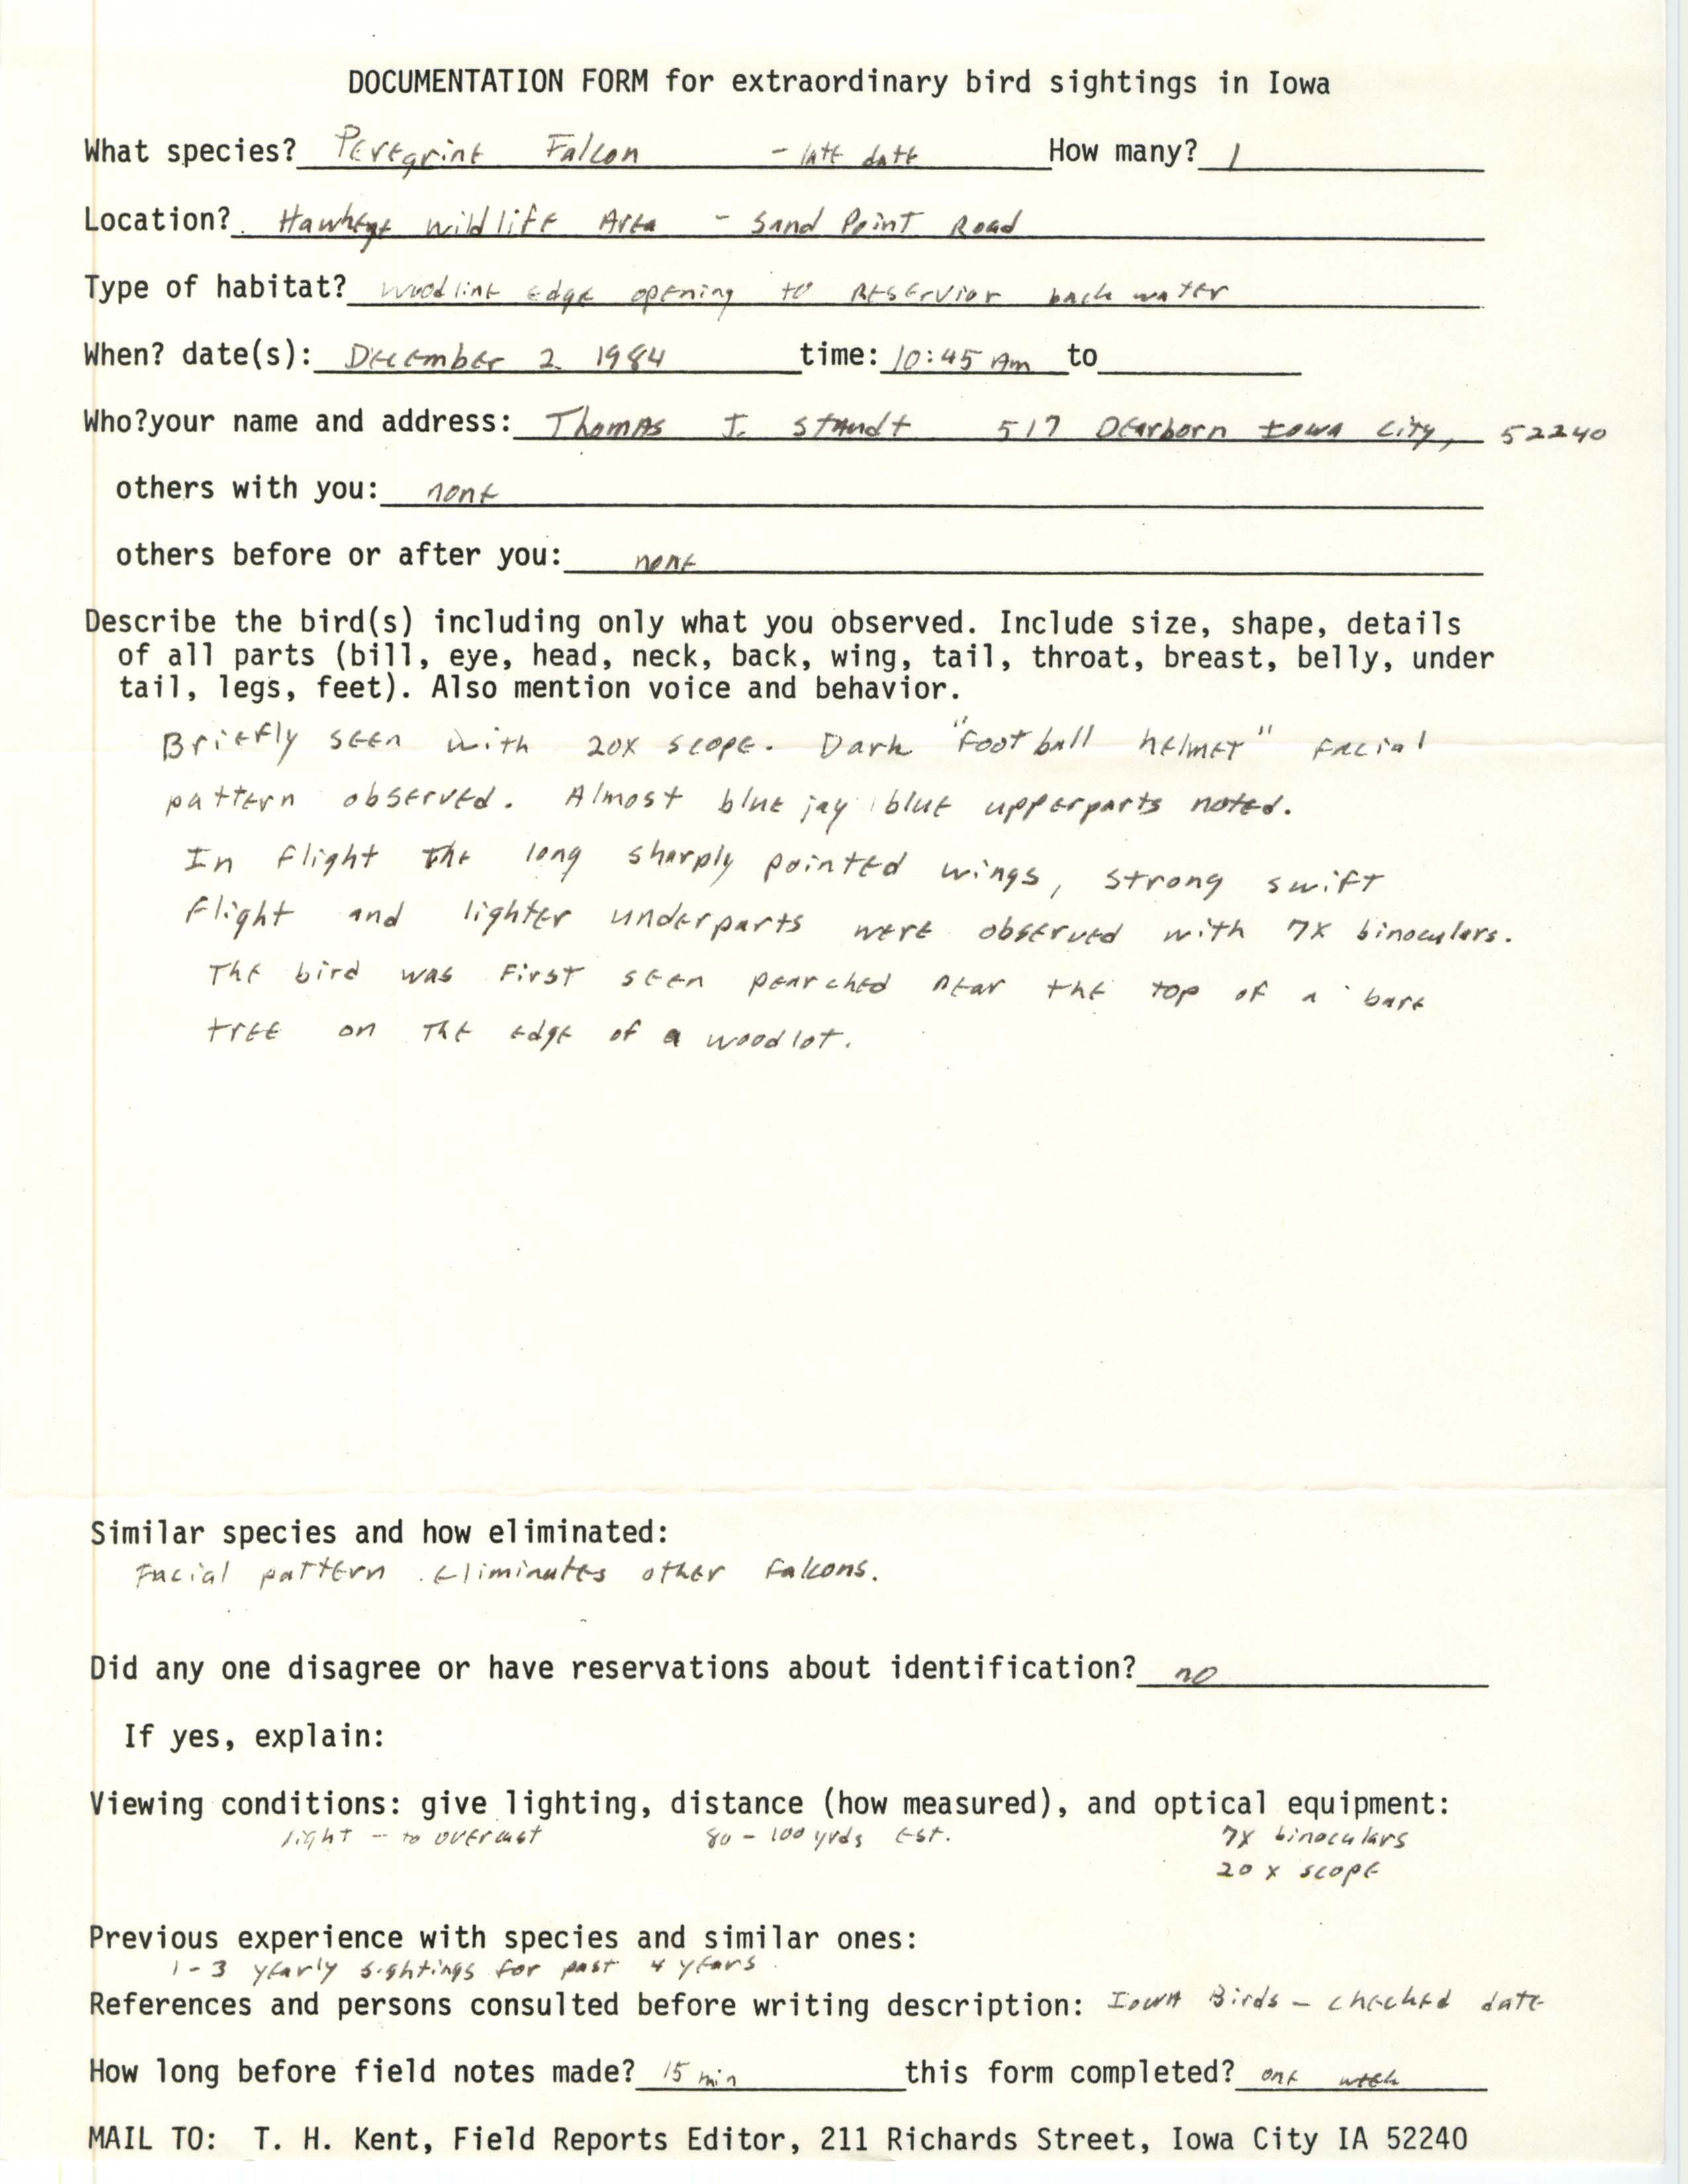 Rare bird documentation form for Peregrine Falcon at Sand Point in Hawkeye Wildlife Area, 1984